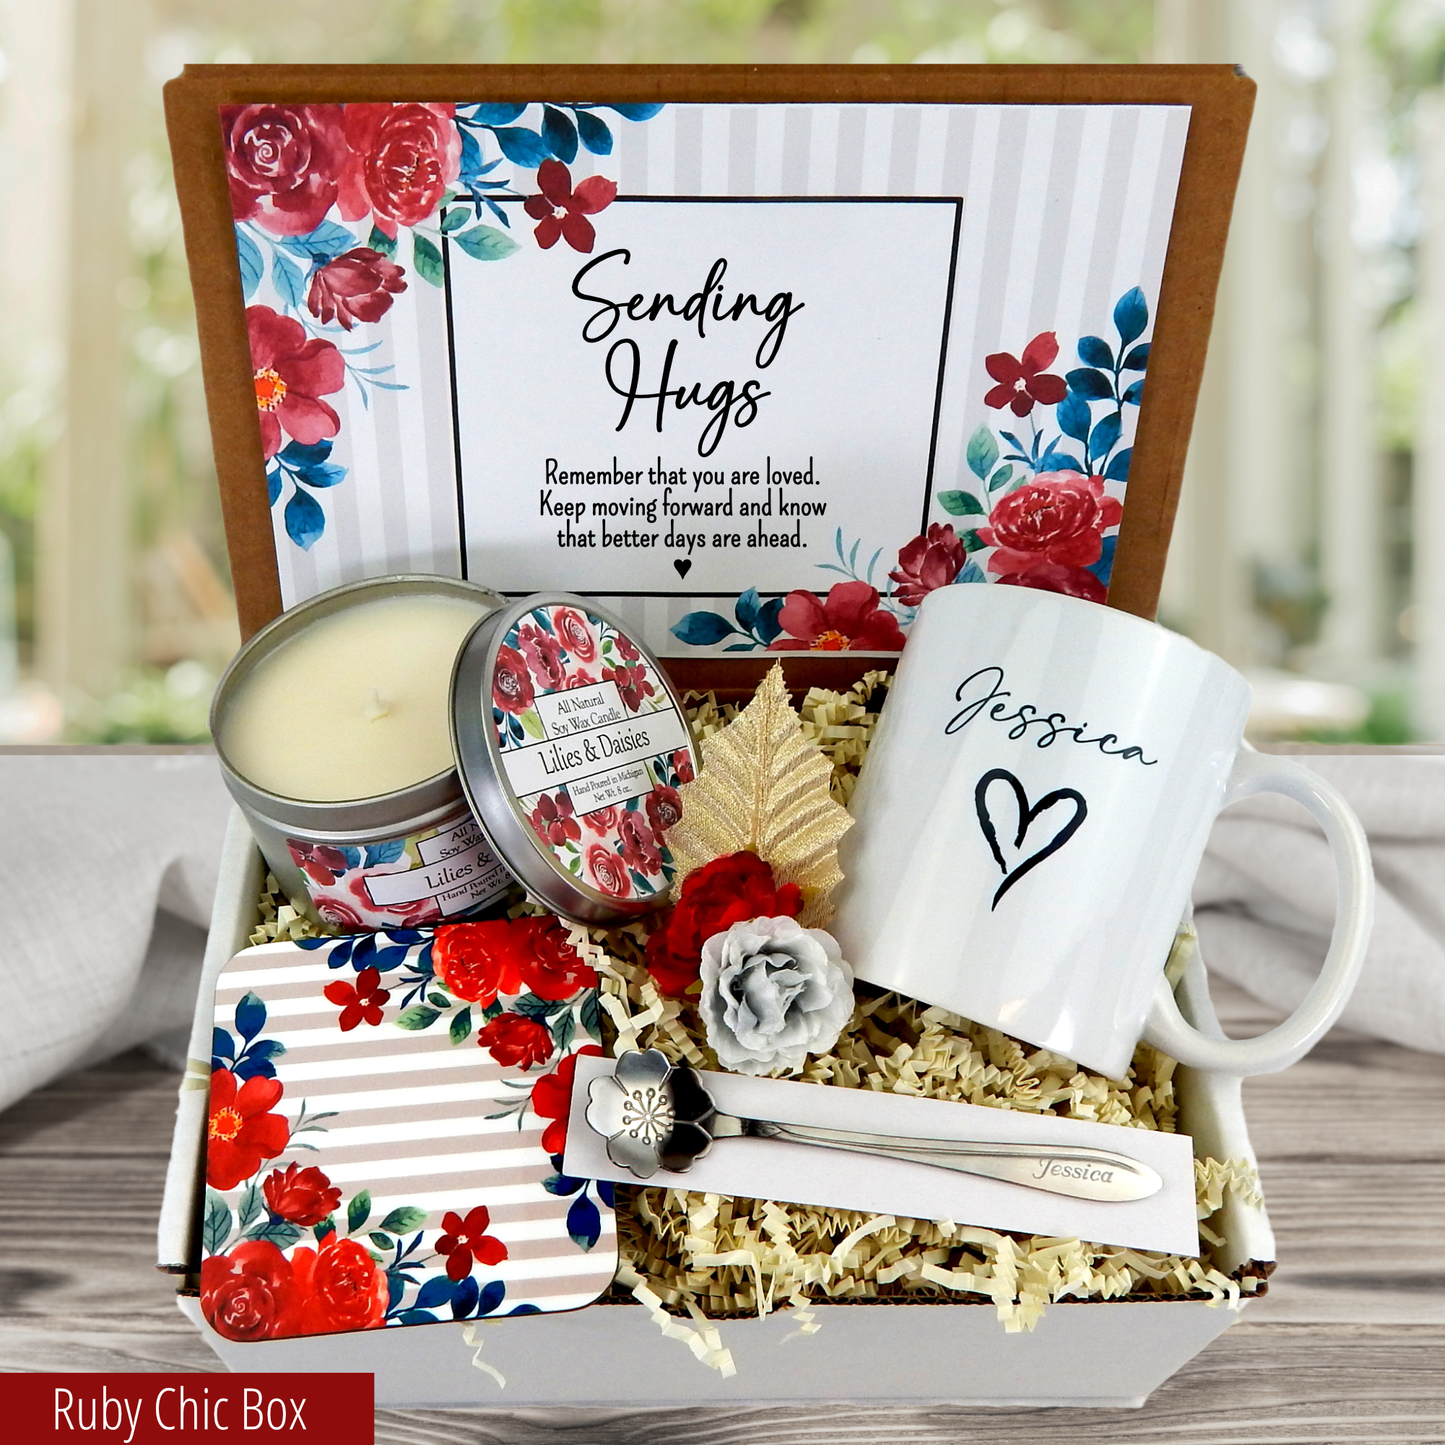 Gift basket with personalized mug for sending hugs to loved ones